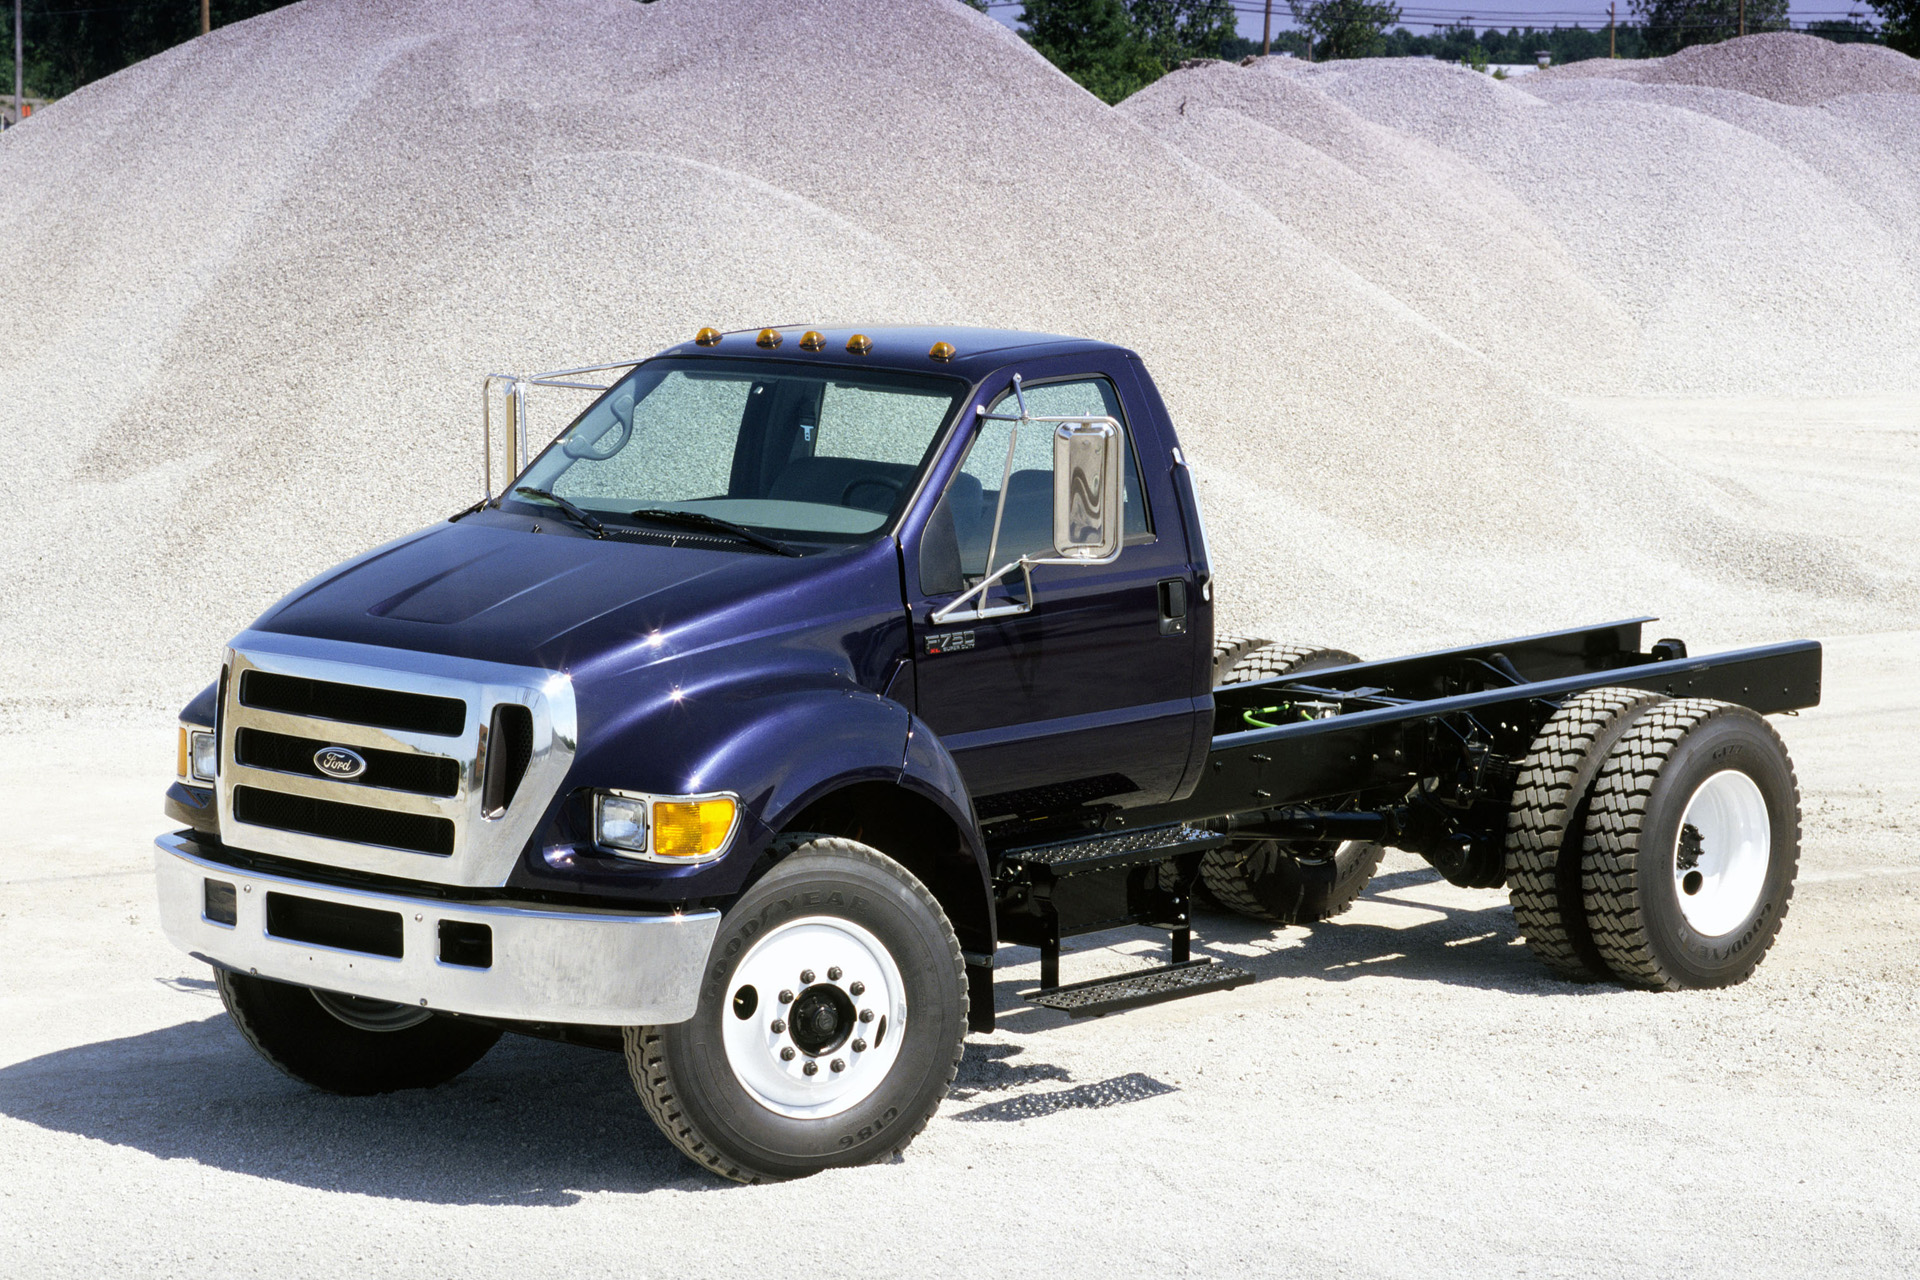 You can vote for this Ford F-750 photo